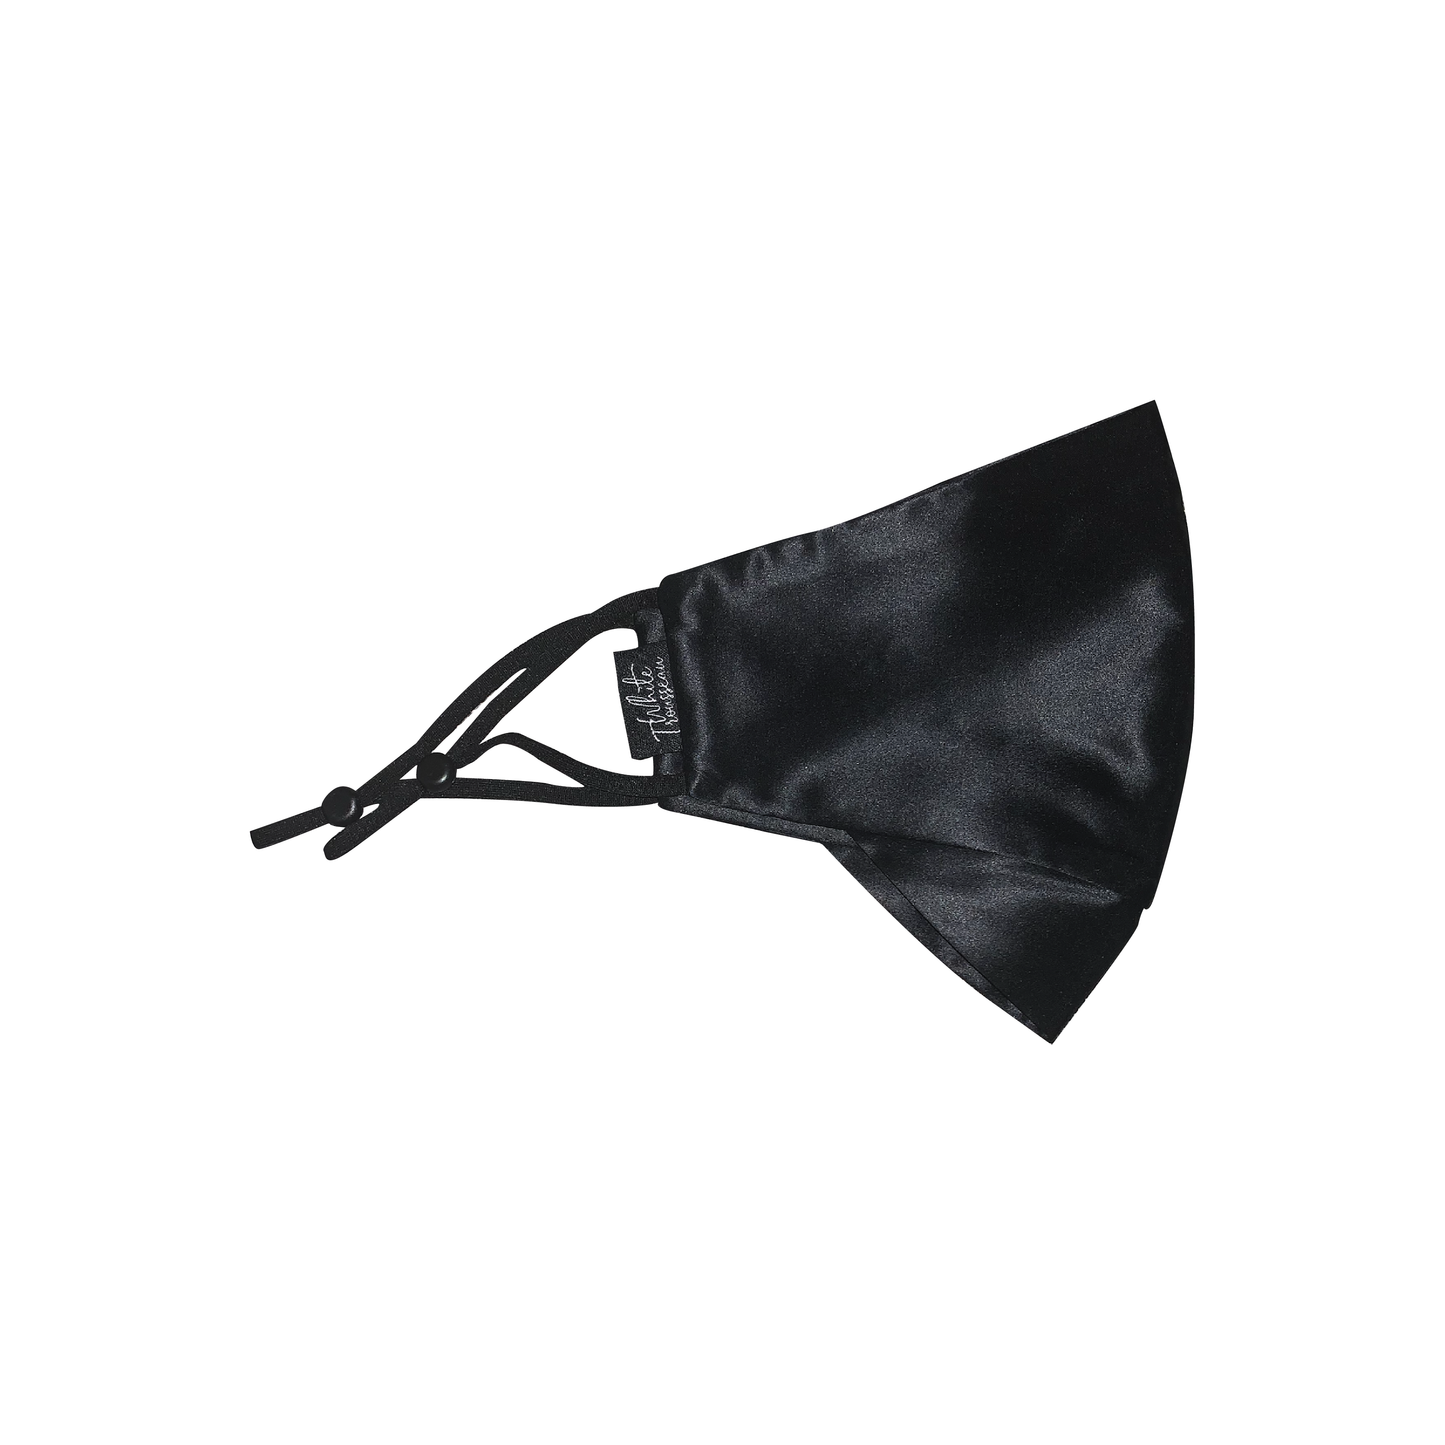 This black mulberry silk mask is the most classic and popular colour that fits every outfit. Super comfortable and flattering, soft face covering for woman and men. It is smooth and breathable with adjustable ear straps to get the perfect fit without hurting your ears, suitable for the whole year. Get the best mulberry silk mask in Singapore.